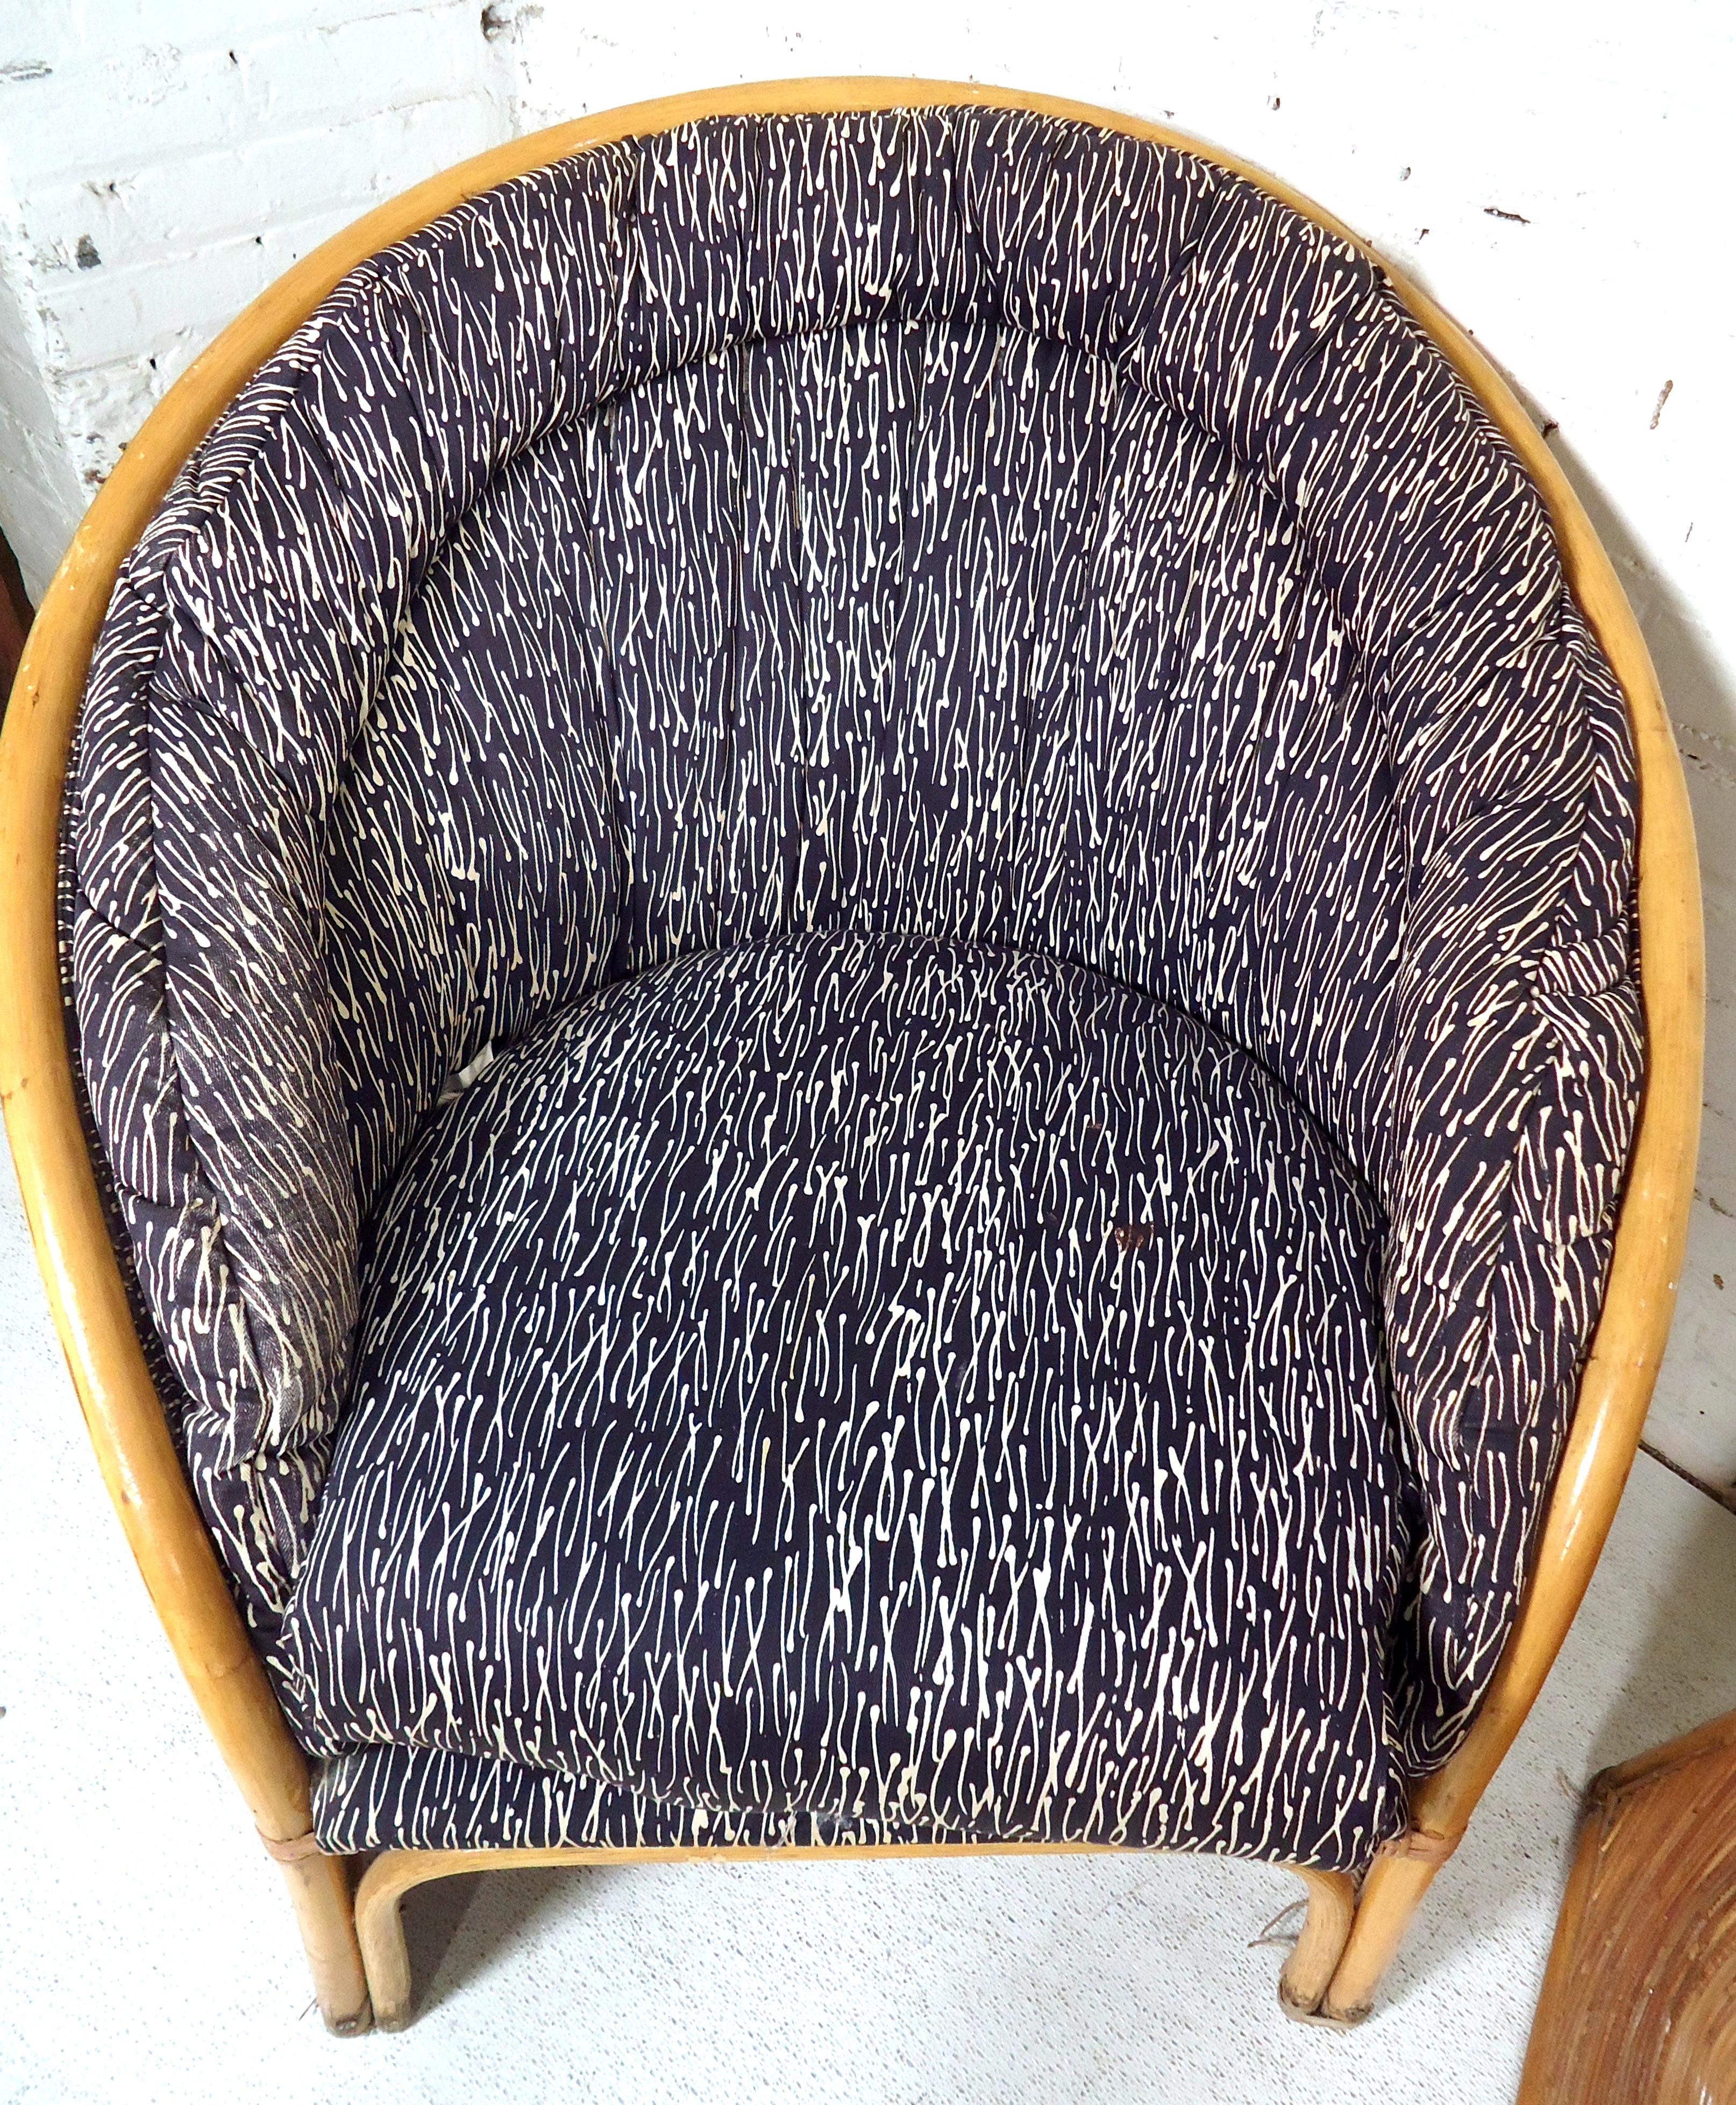 Late 20th Century Mid-Century Modern Style Wicker Chairs